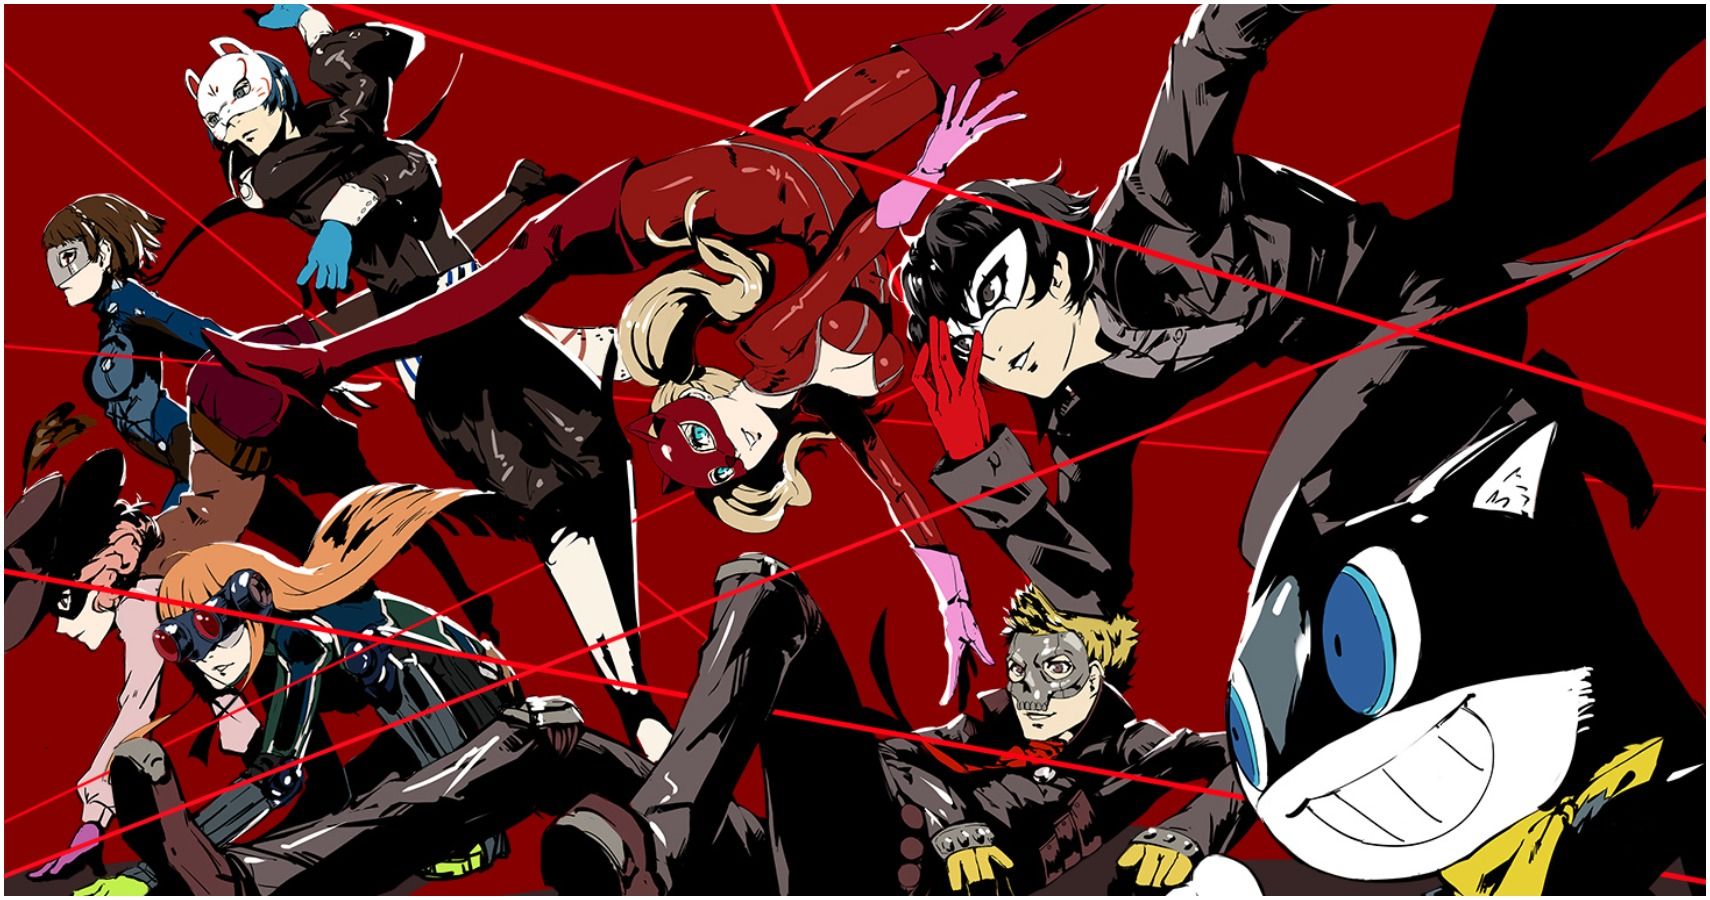 ps now persona 5